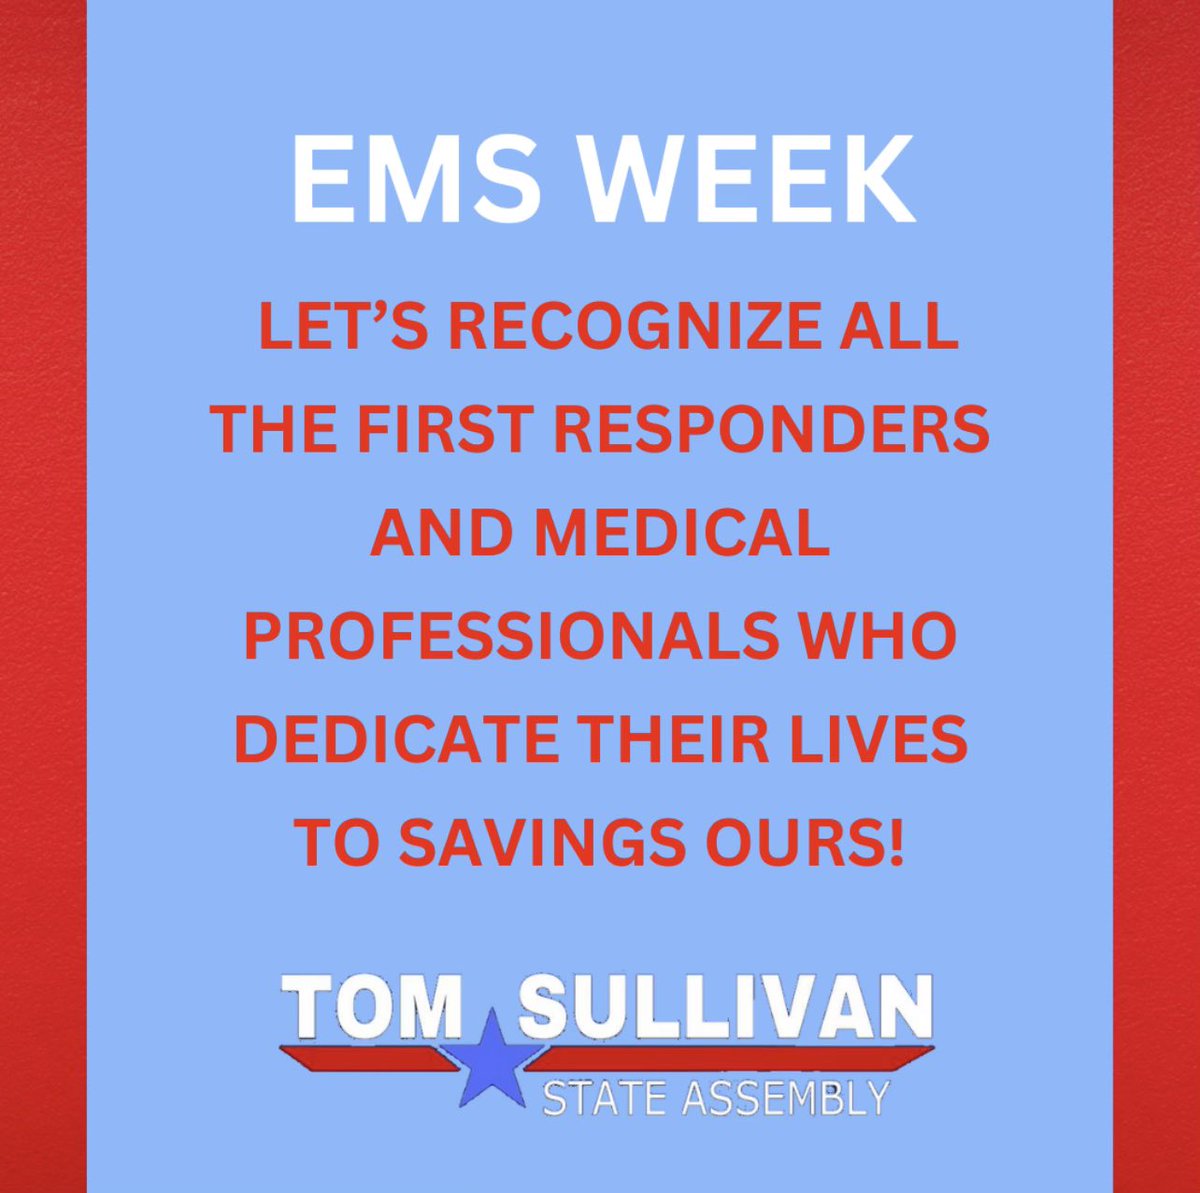 As a Veteran and someone who has dedicated his life to service, I deeply appreciate the sacrifices made by our first responders. This EMS Appreciation Week, I recognize the critical support you provide to our community. Your dedication inspires me, and when elected, I pledge to